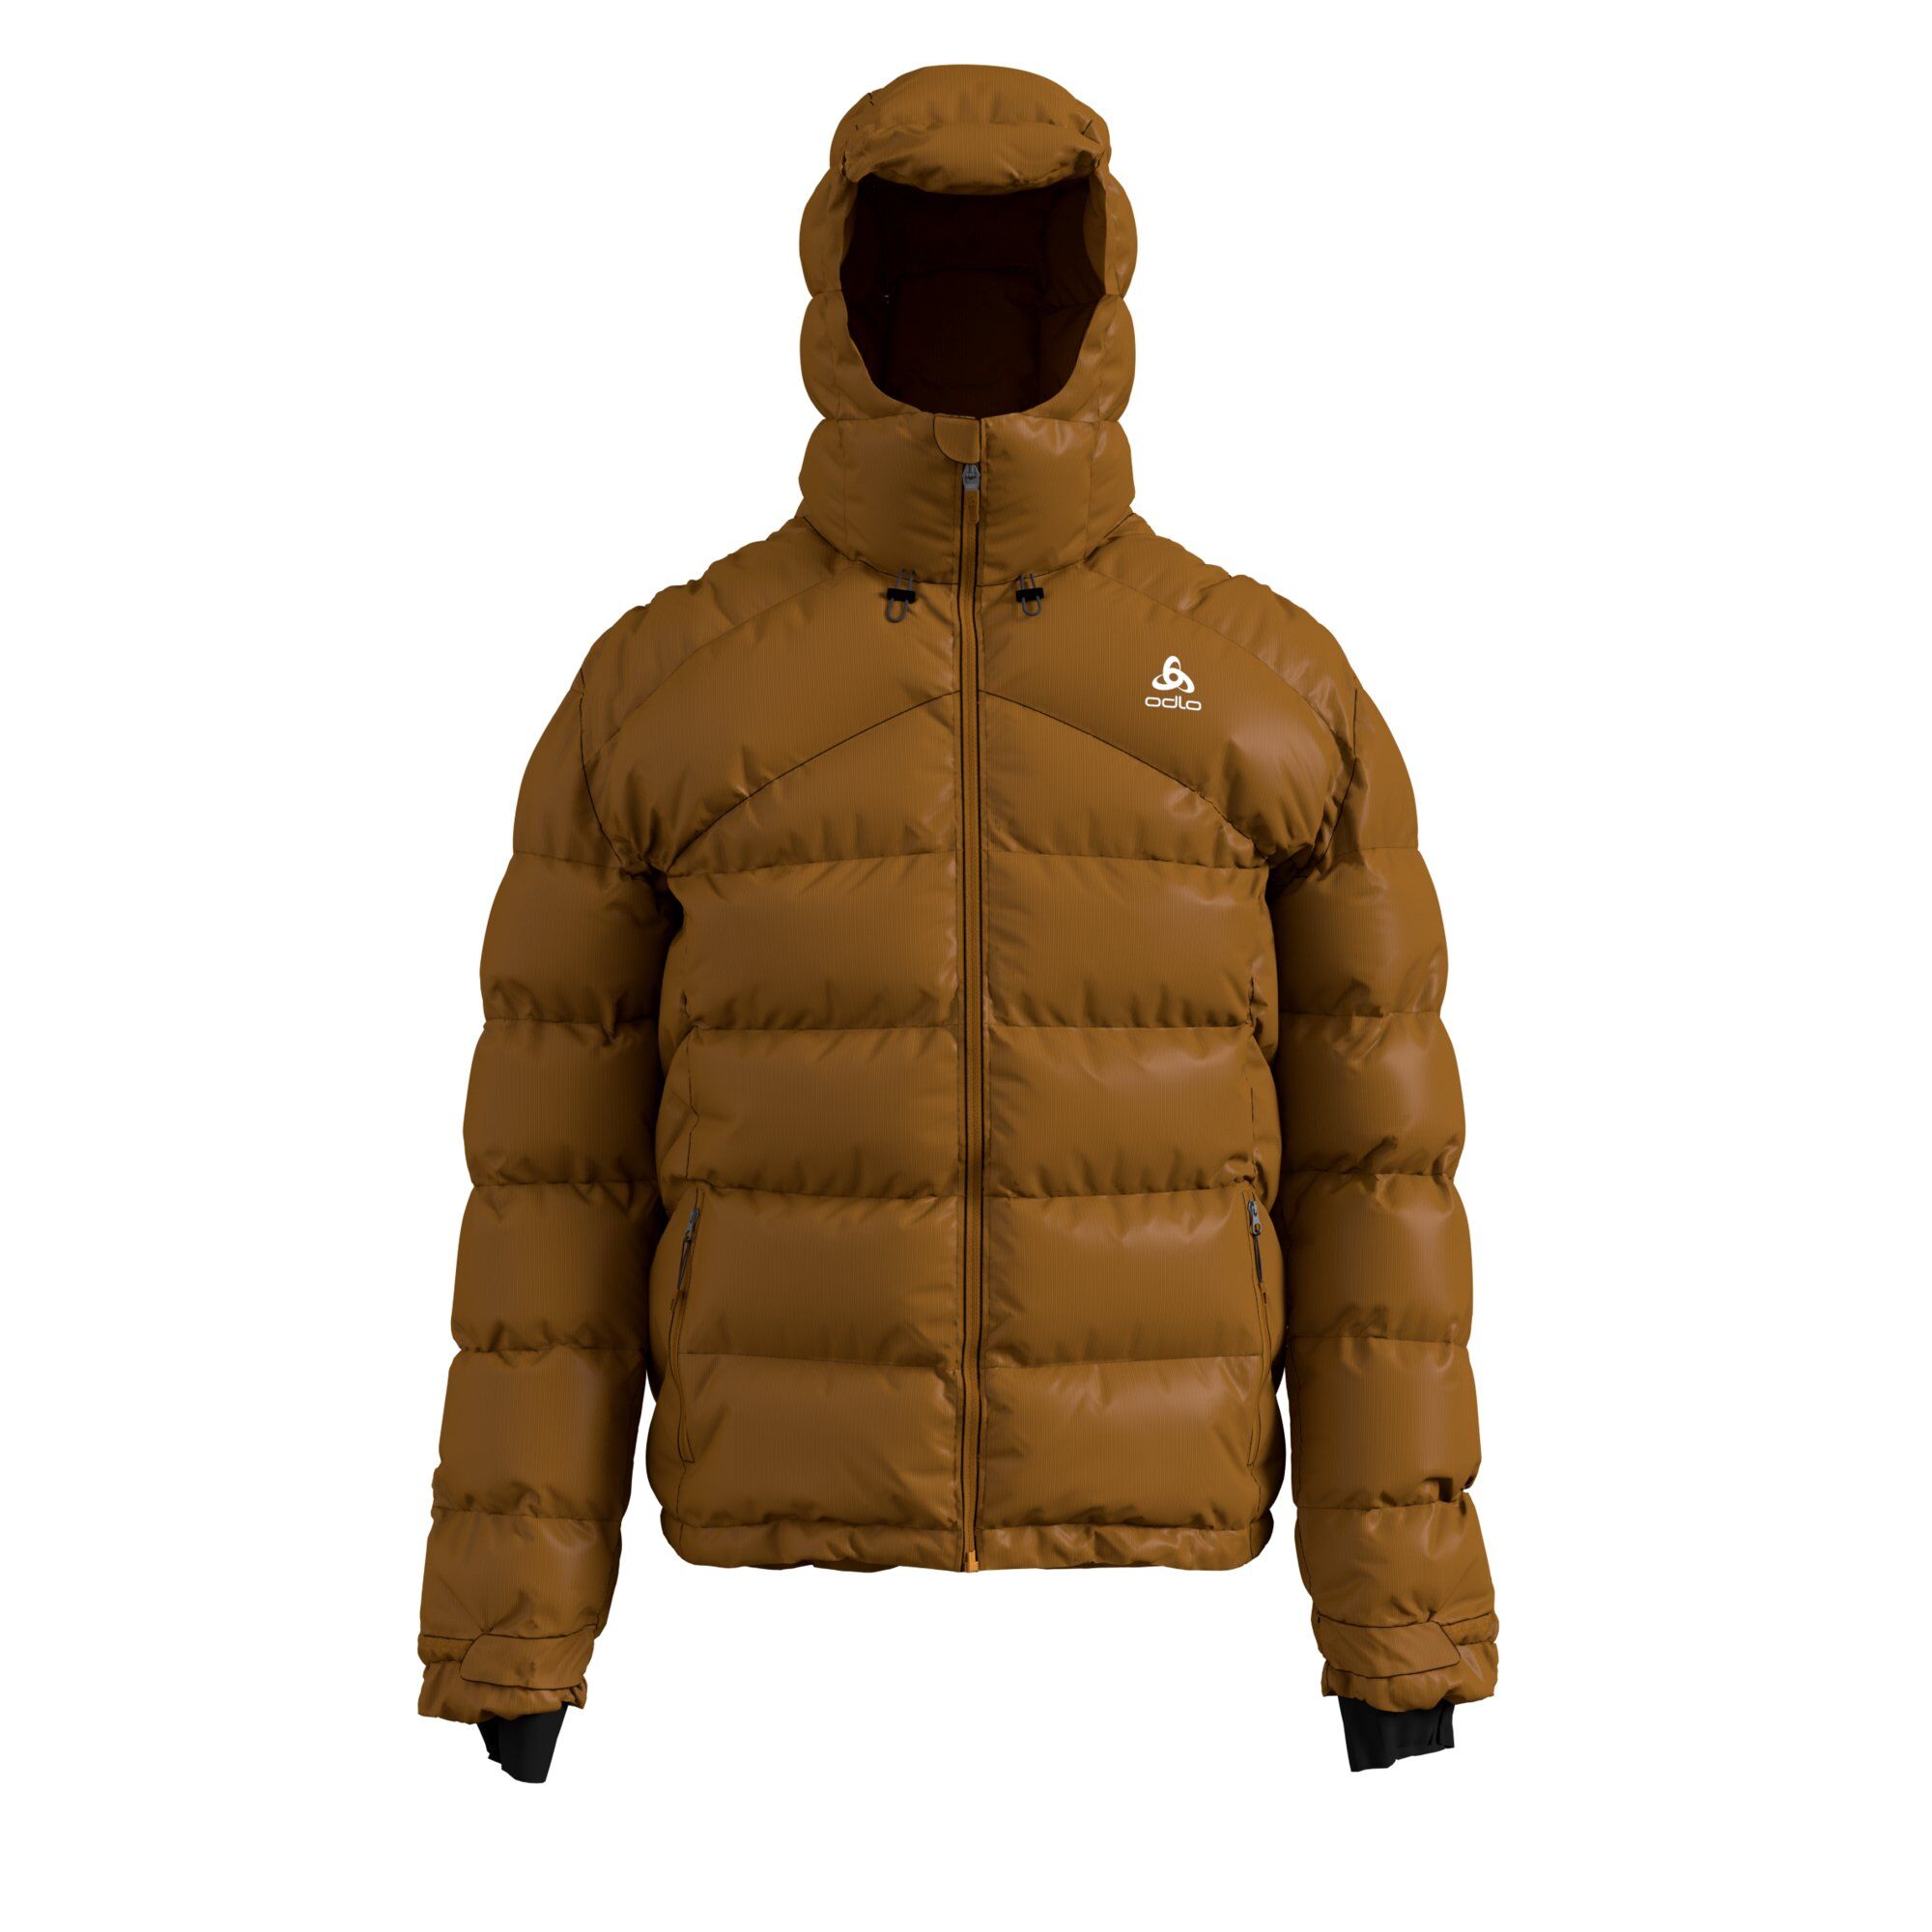 Odlo Cocoon N-Thermic X-Warm Jacket Insulated - Down jacket - Men's